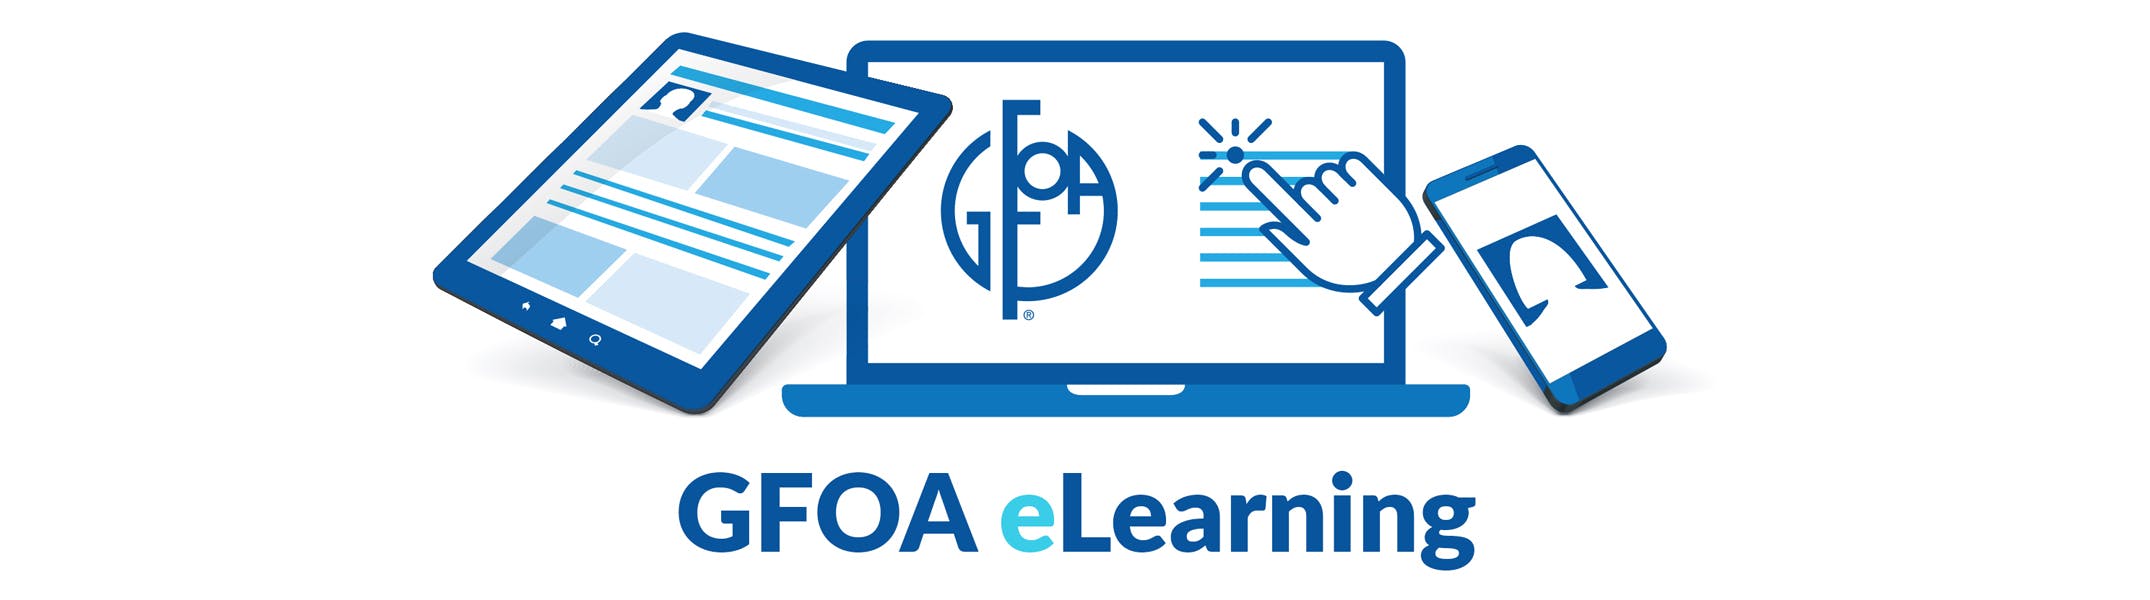 Computer and words "GFOA eLearning"